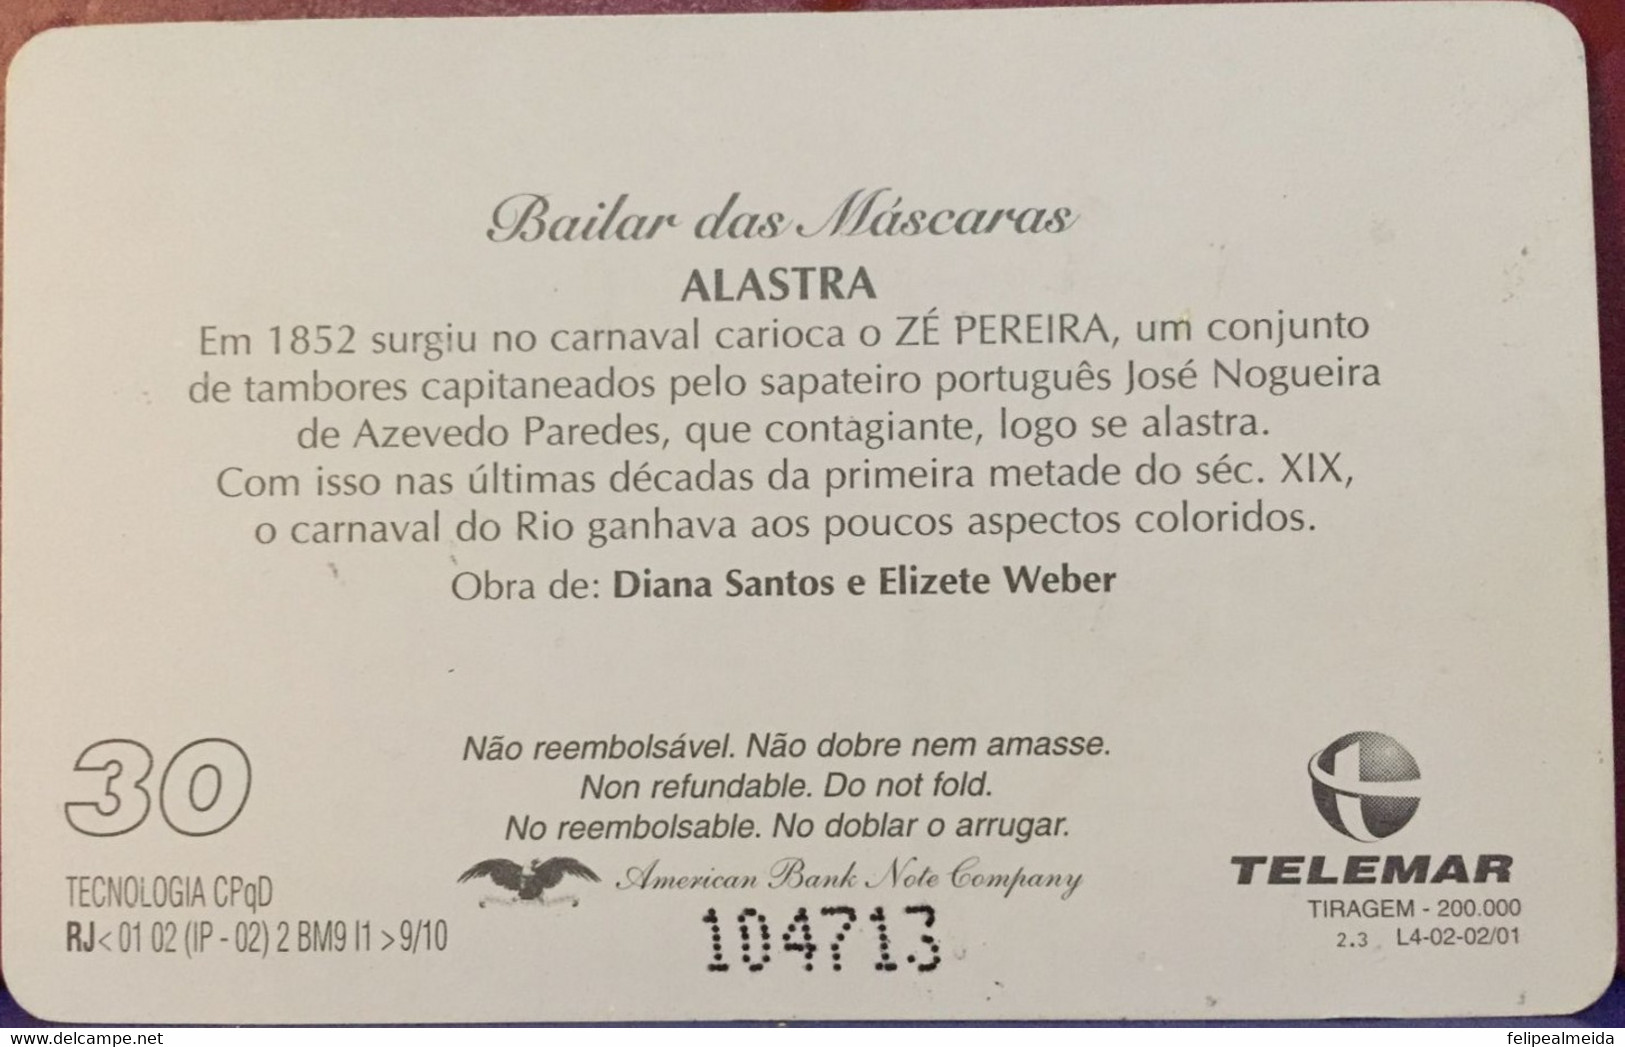 Phone Card Manufactured By Telemar In 2001 - Bailar Das Mascaras - Alastra - Culture